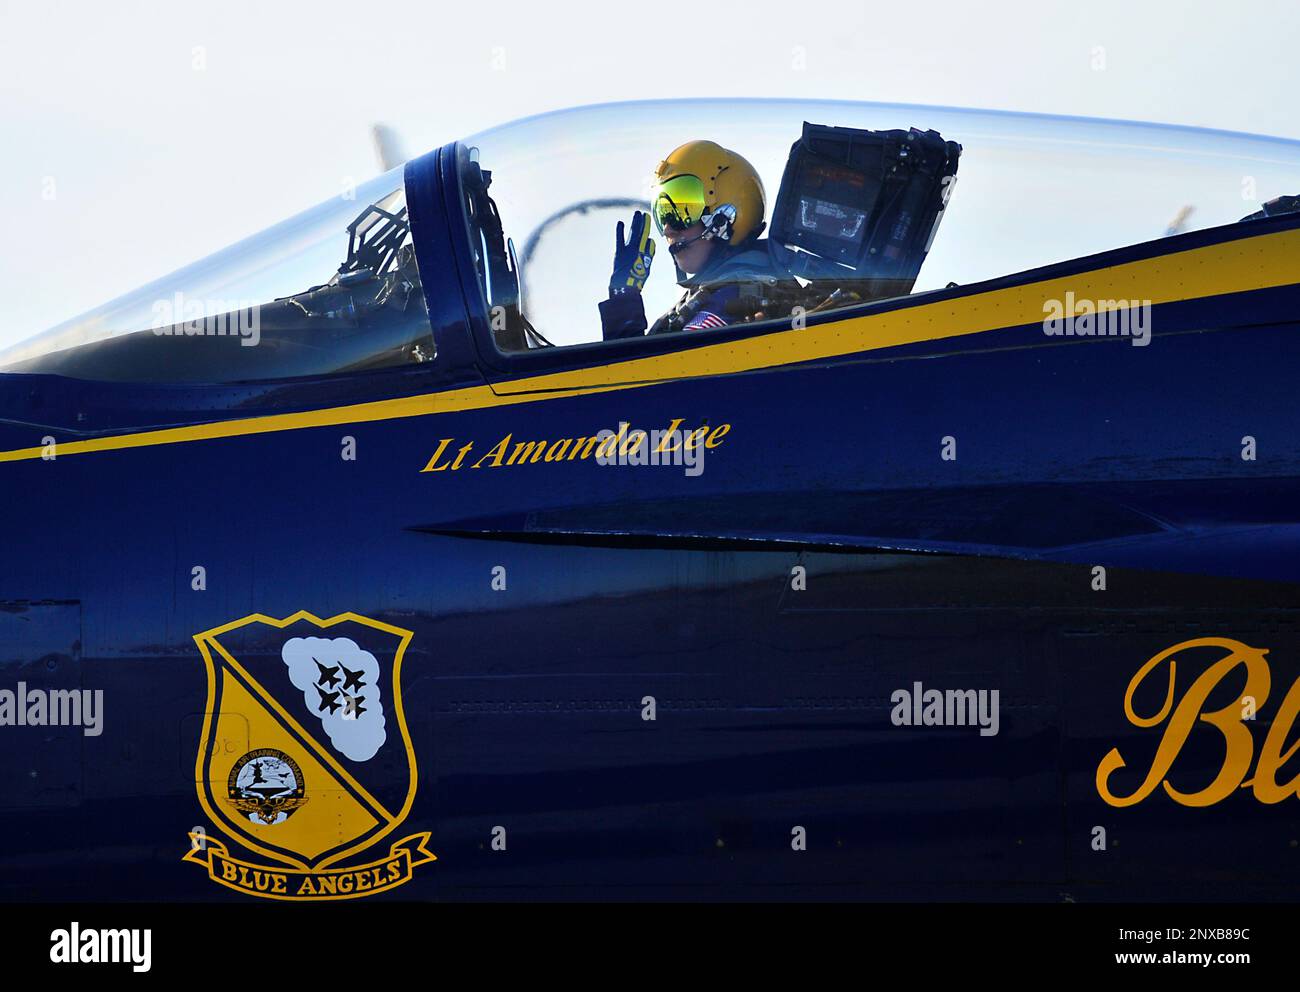 230118-N-KB563-1504 EL CENTRO, Calif. (Jan. 18, 2023) Left wing pilot, Lt. Amanda Lee, assigned to the U.S. Navy Flight Demonstration Squadron, the Blue Angels, prepares for takeoff prior to a training flight over Naval Air Facility (NAF) El Centro. Lt. Amanda Lee is the squadron’s first woman F/A-18E/F demonstration pilot. The Blue Angels are currently conducting winter training at NAF El Centro, California, in preparation for the upcoming 2023 air show season. Stock Photo